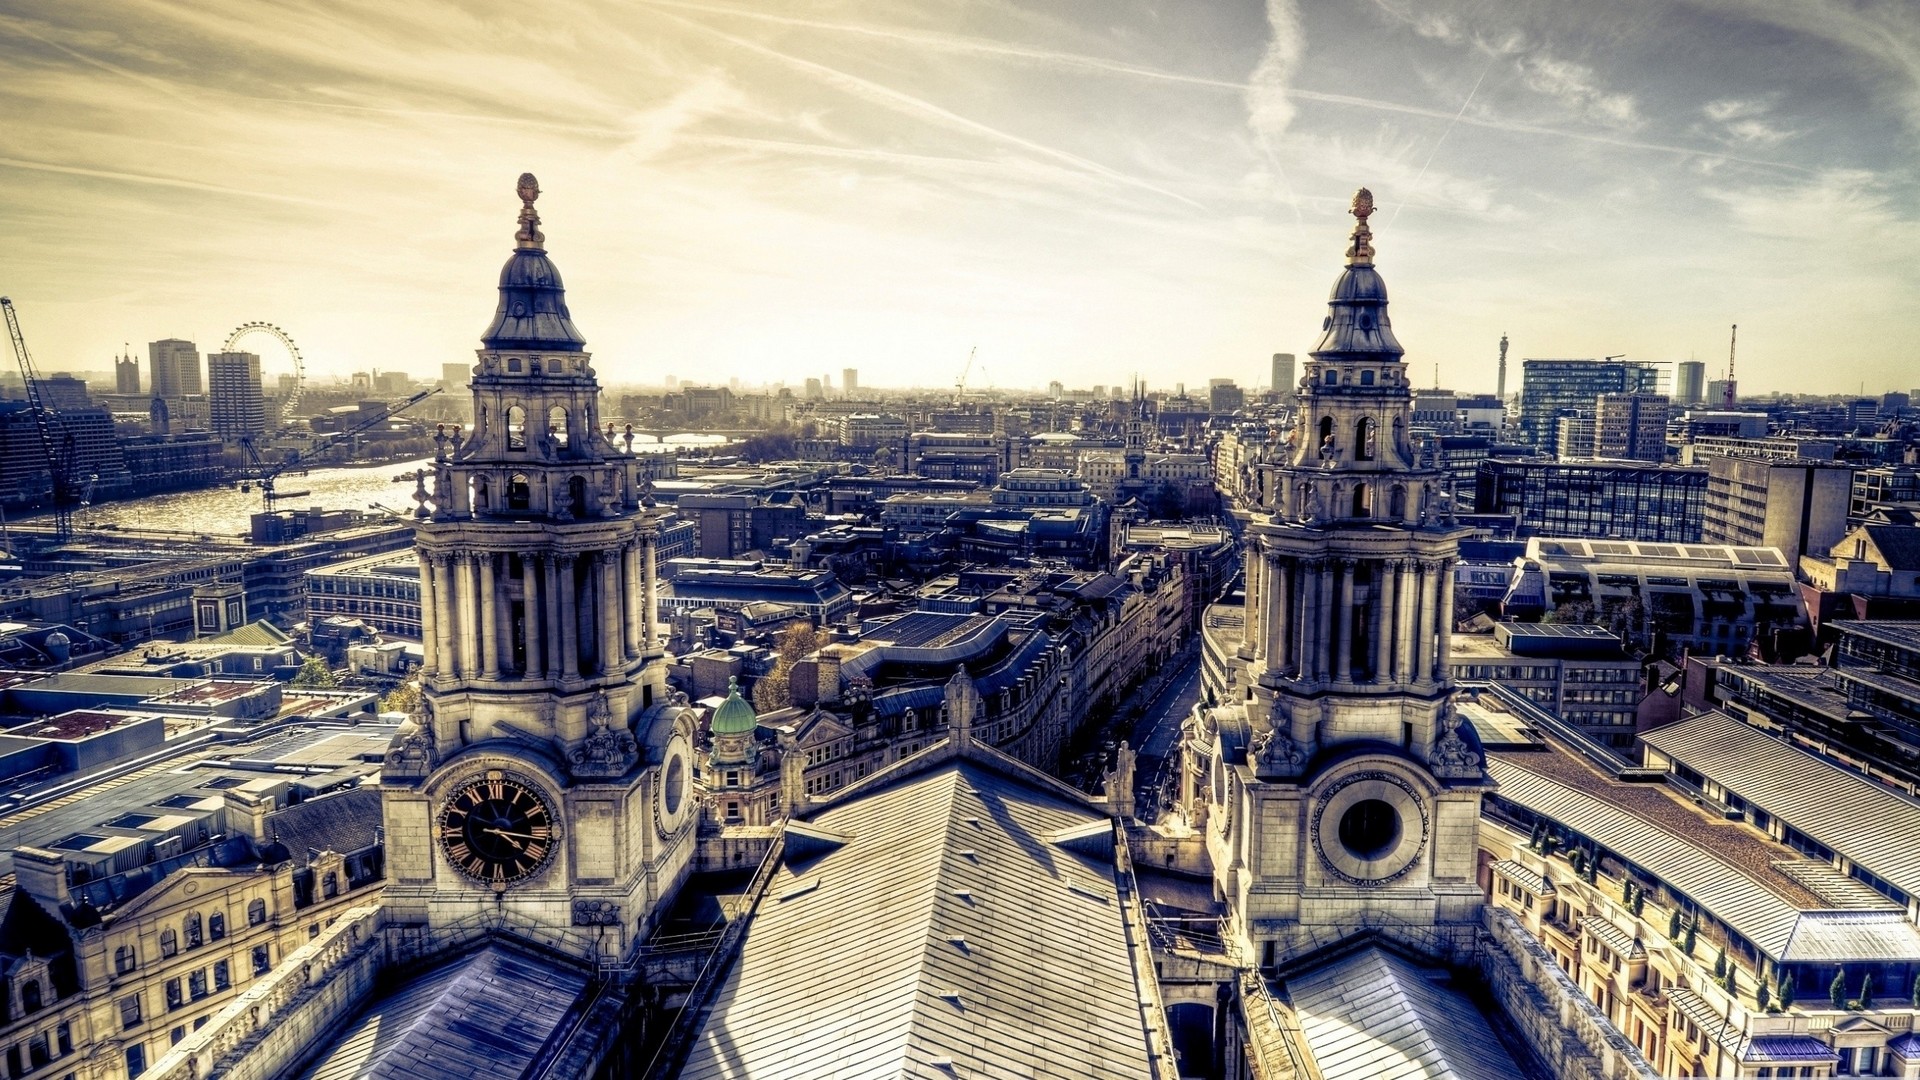 General 1920x1080 cathedral rooftops London St. Paul's Cathedral city cityscape old building sepia UK England